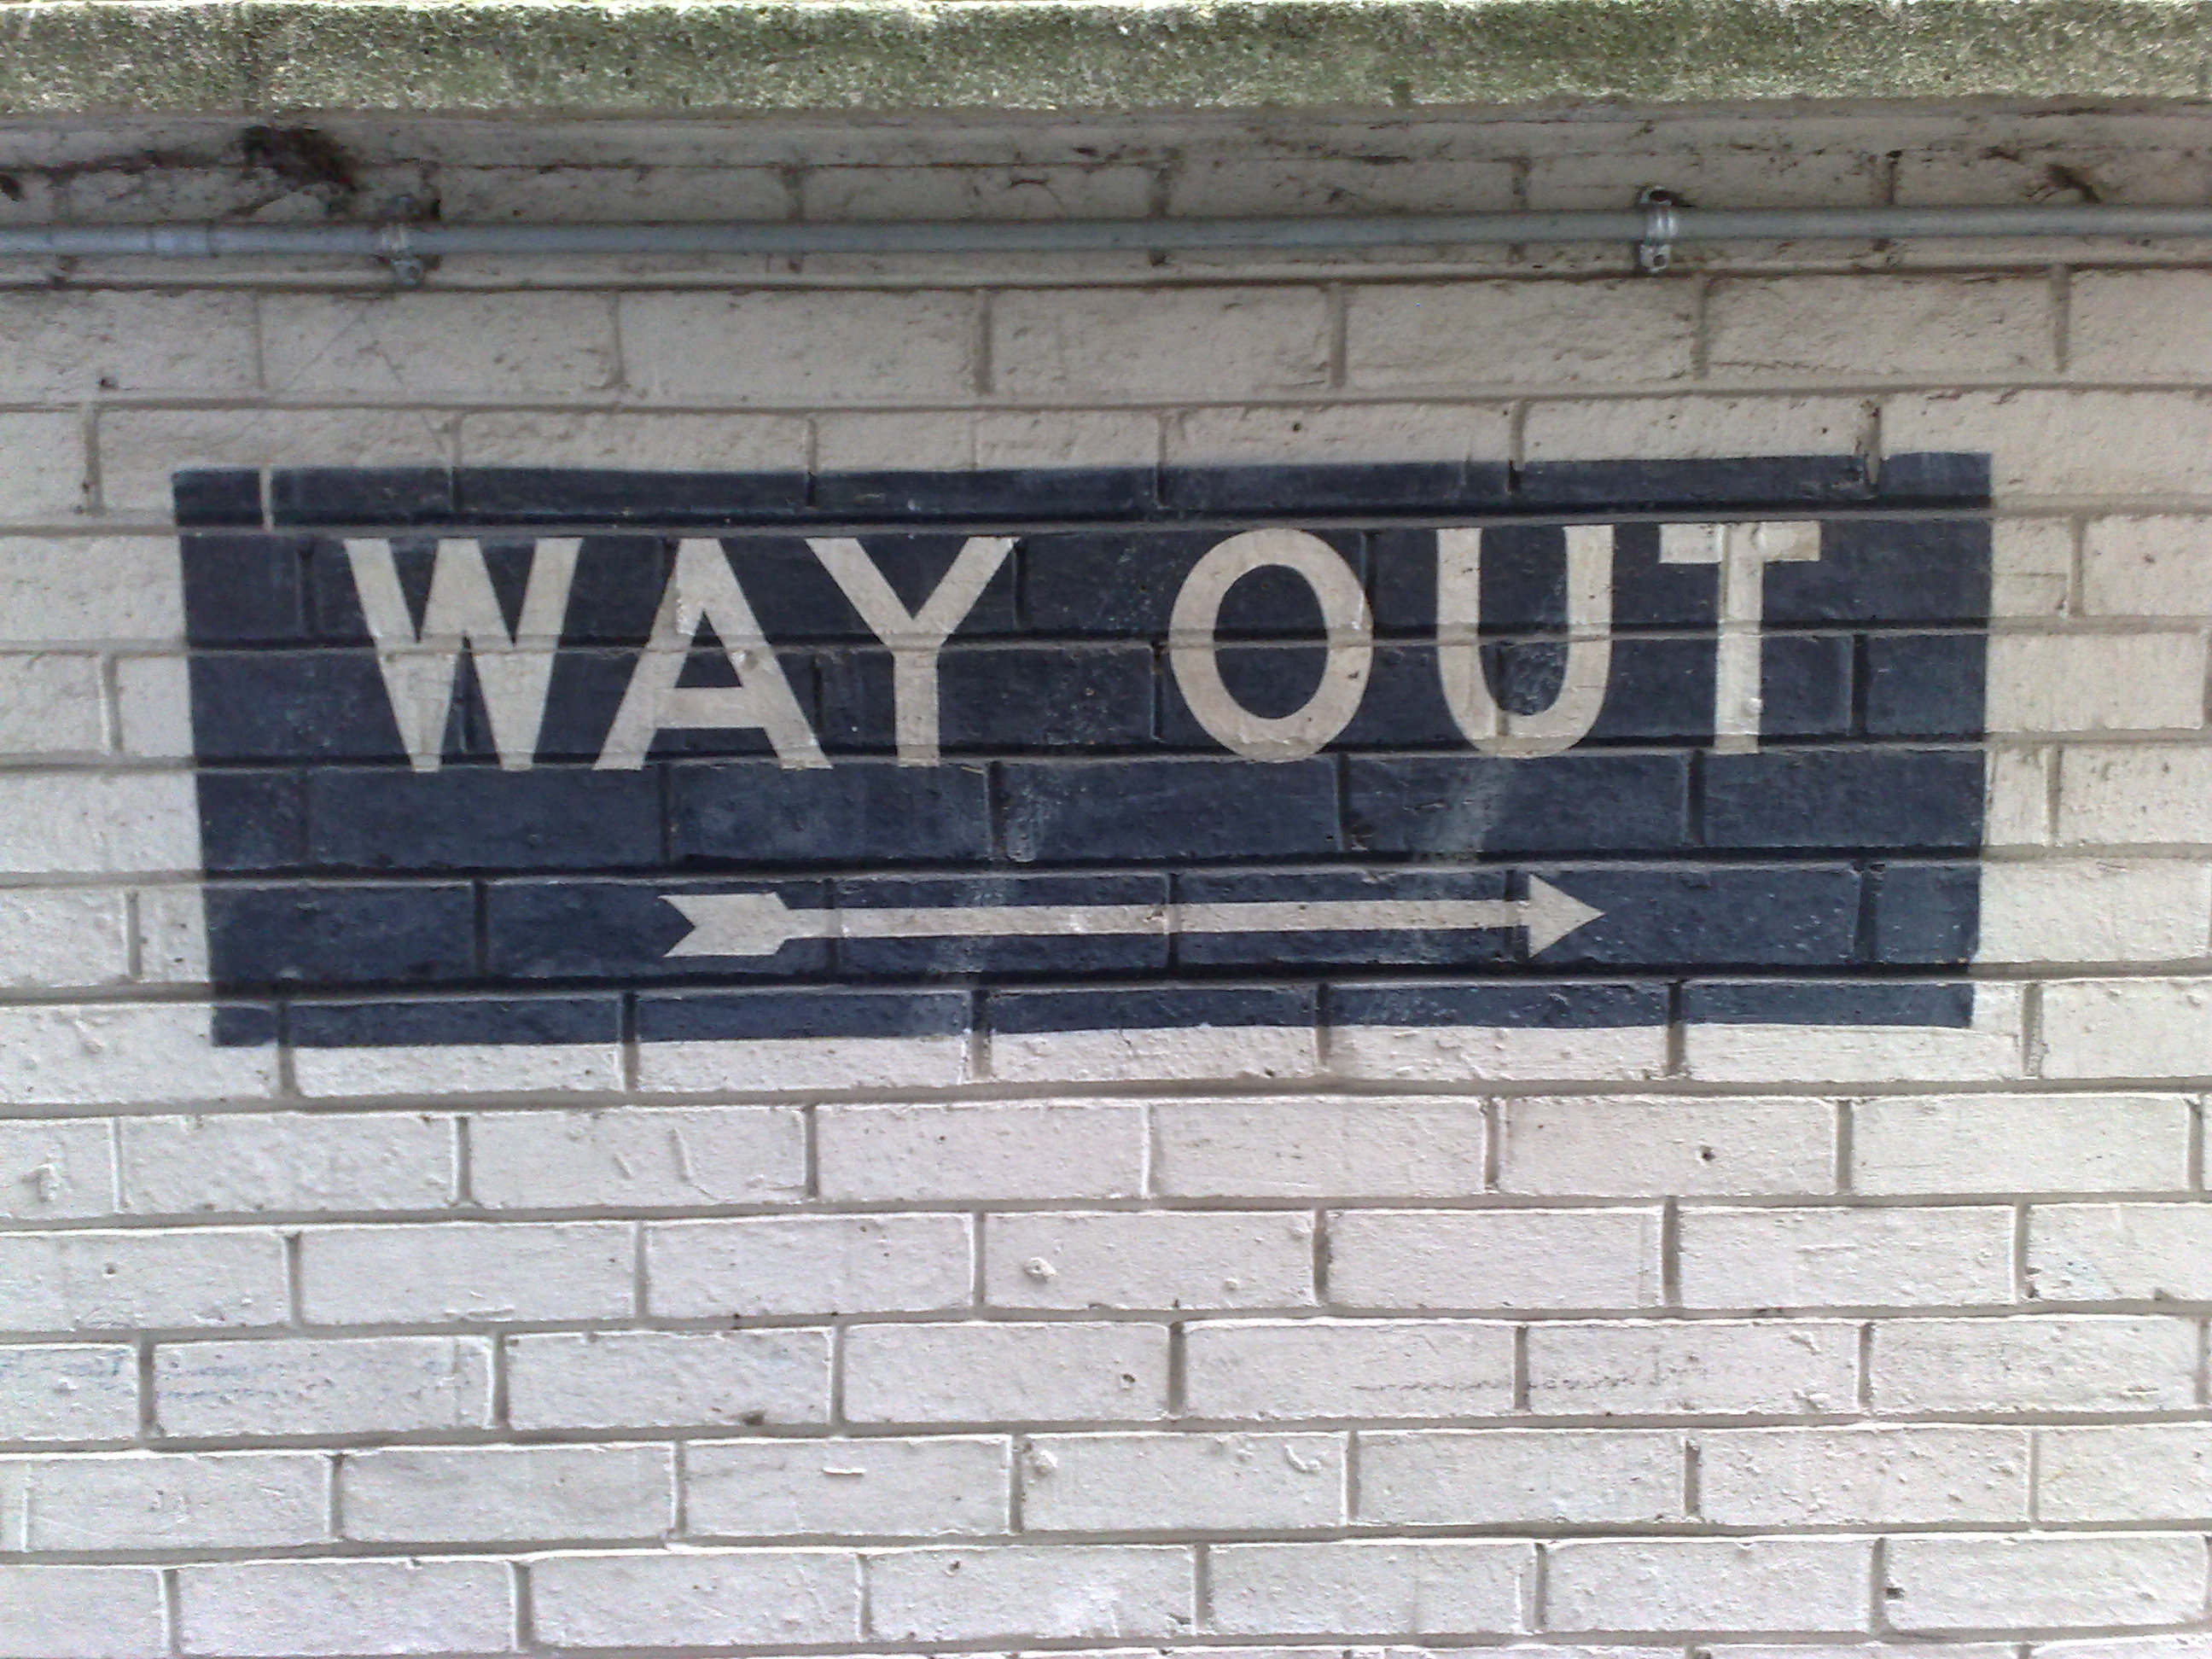 File:Way out.jpg - Wikimedia Commons